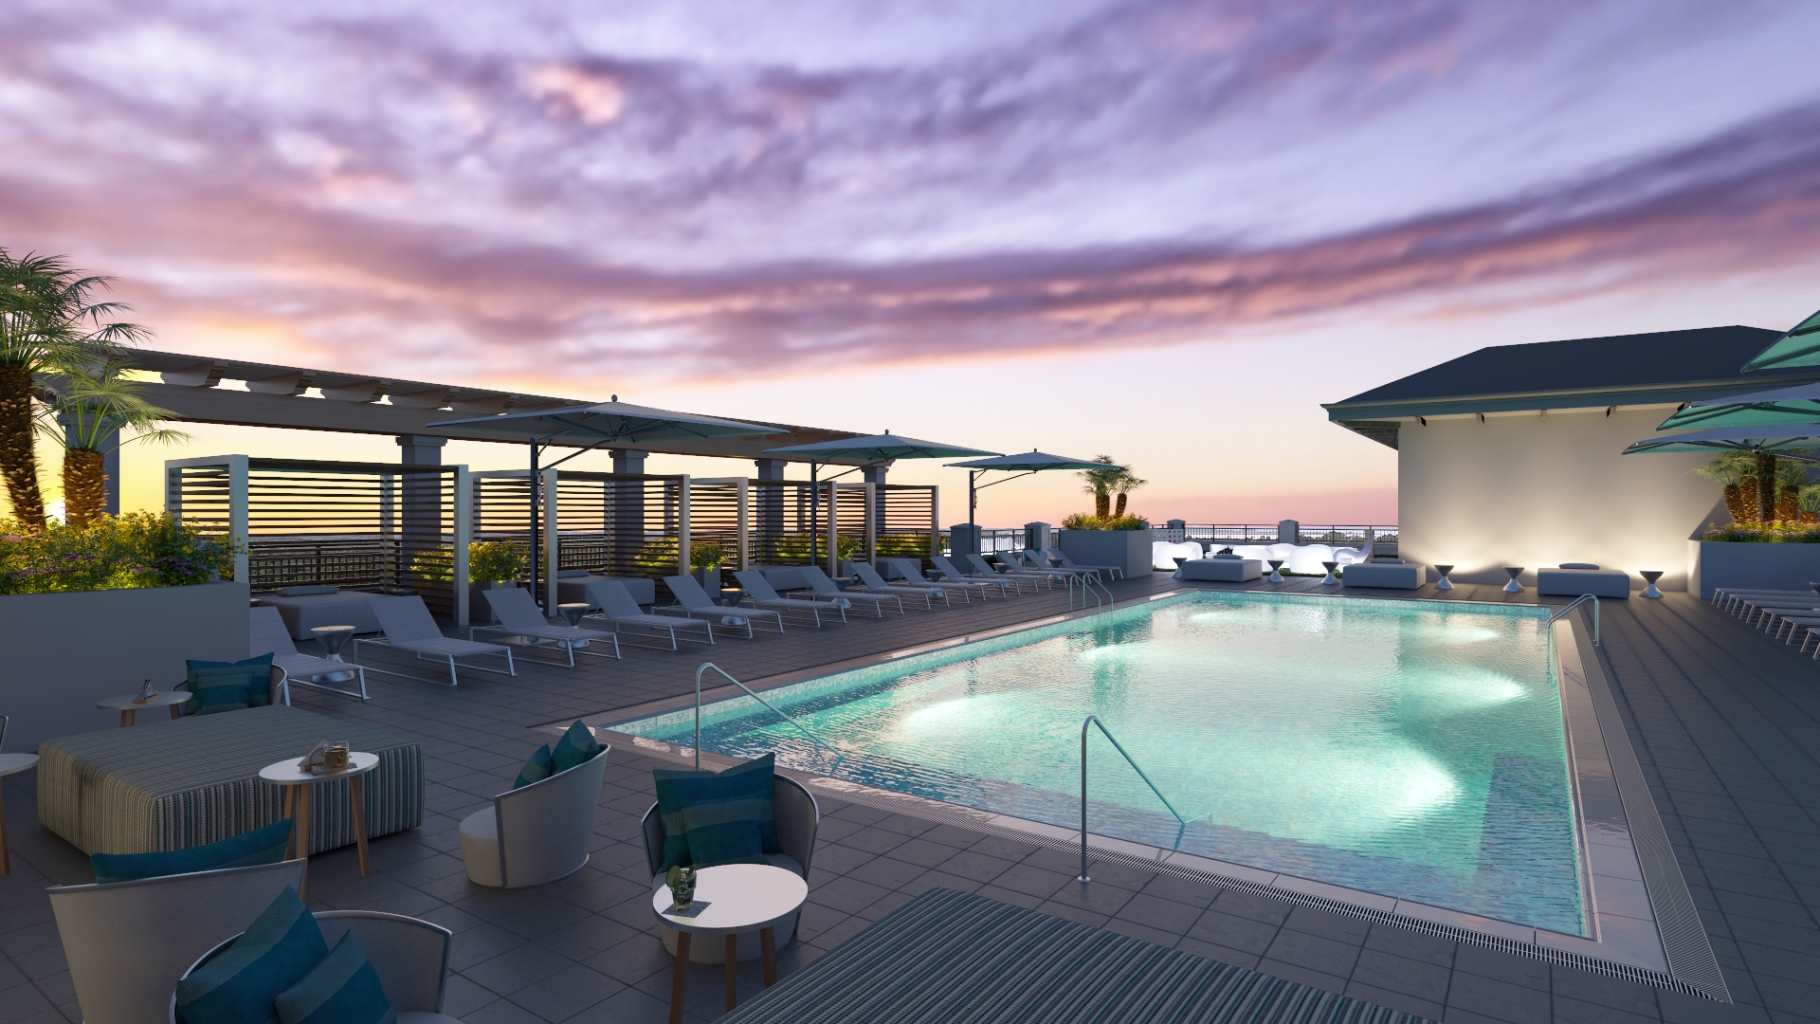 The Ara rooftop pool and lounge feature a lit of pool below a sunset coloured sky.